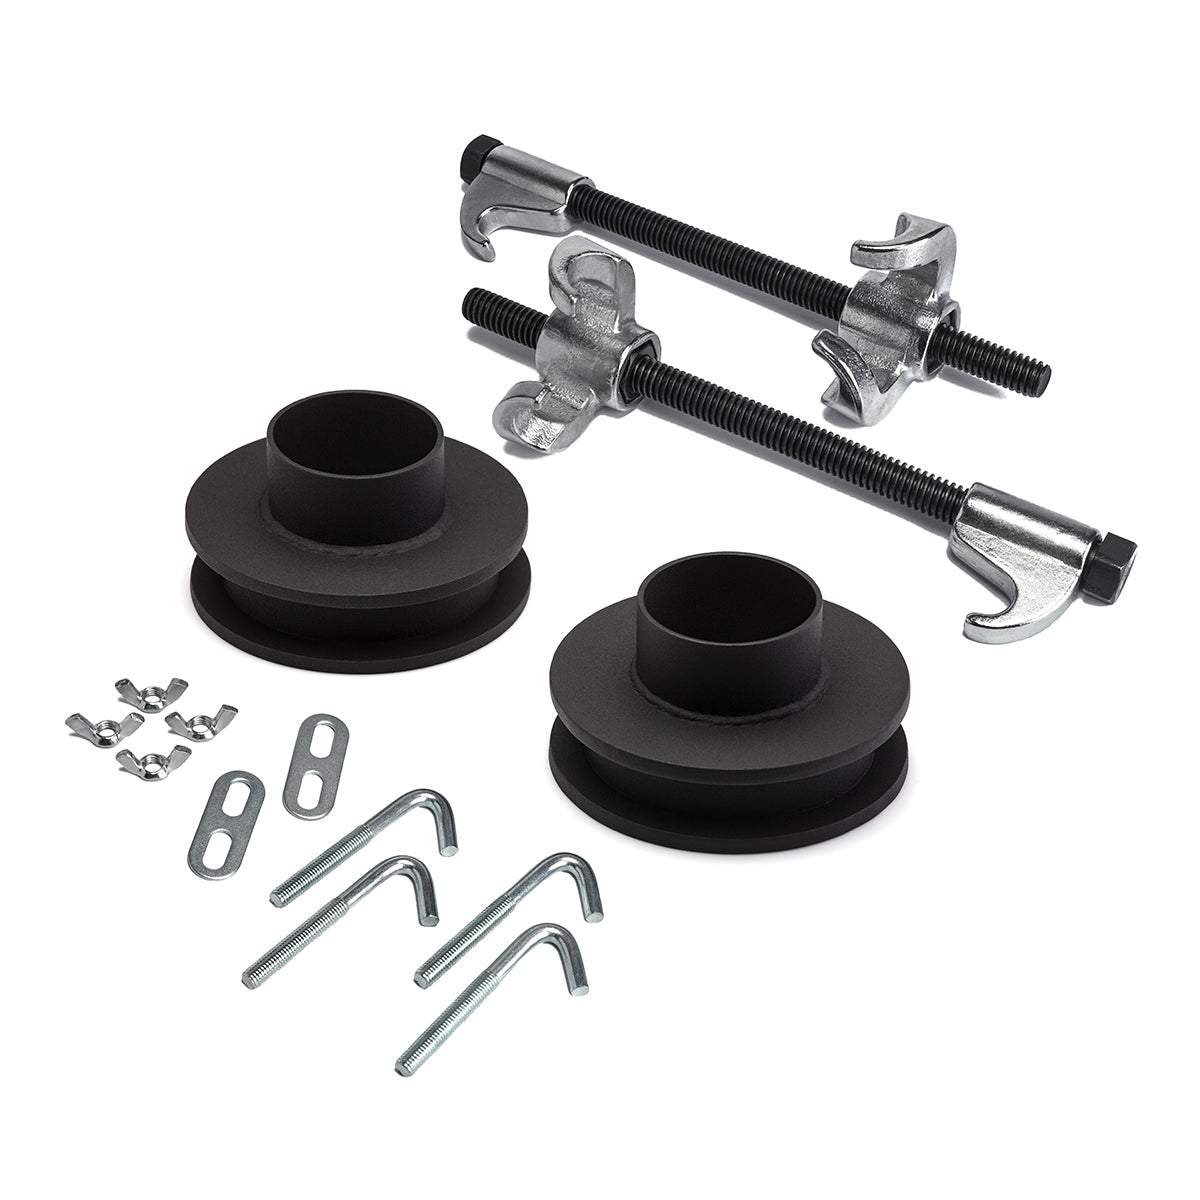 1999-2007 GMC Sierra 1500 2WD Front Lift Kit with Compressor Tool